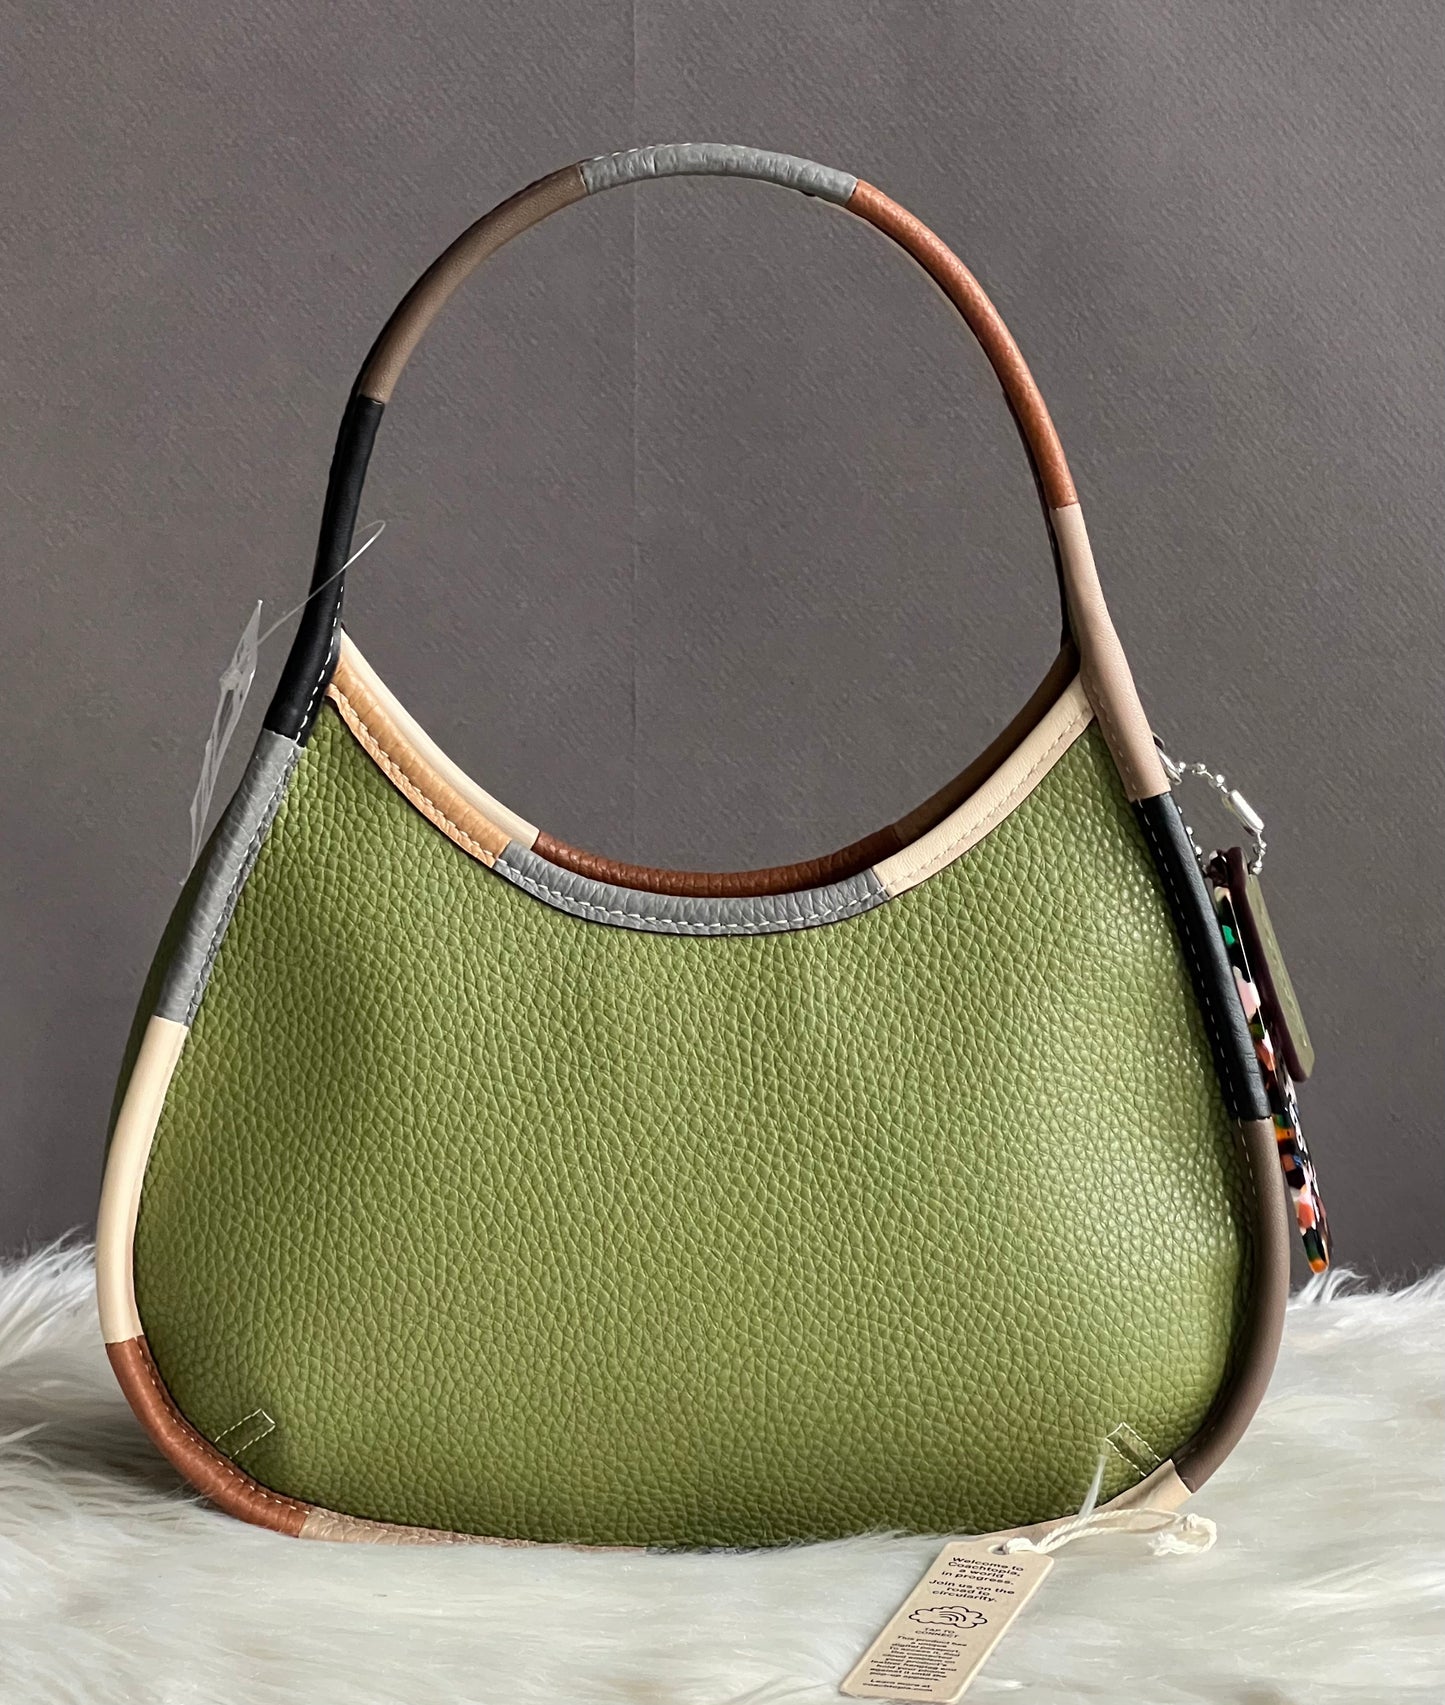 Coach Ergo Bag with Colorful Binding in Upcrafted Leather